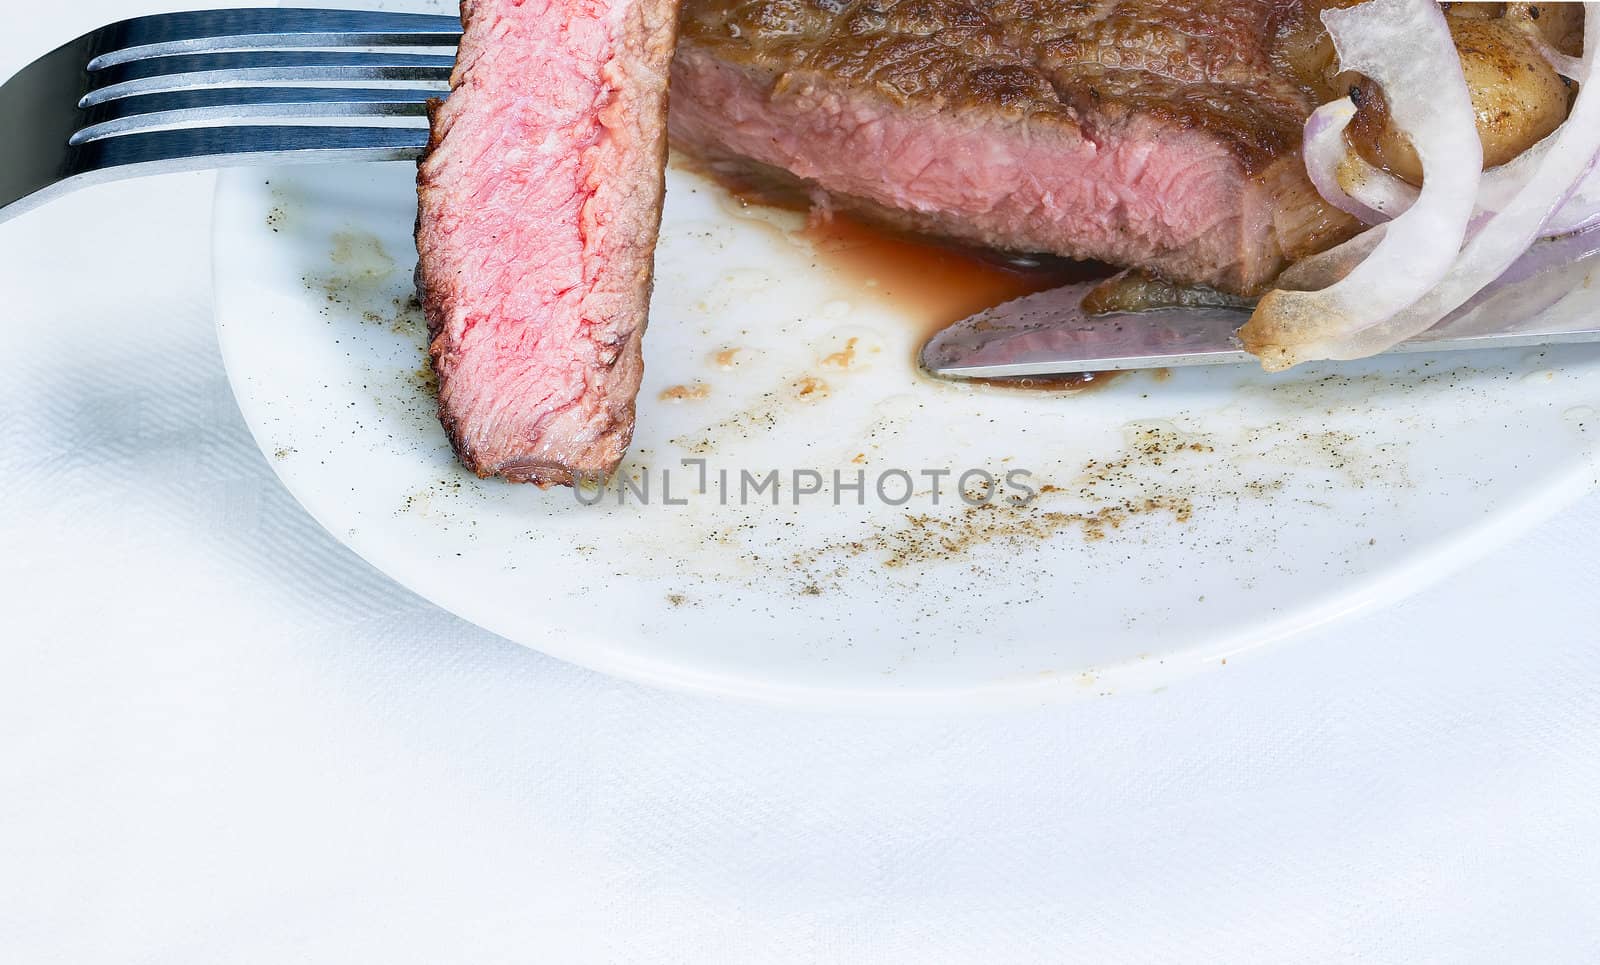 fresh juicy beef ribeye steak slice grilled with fork over a plate